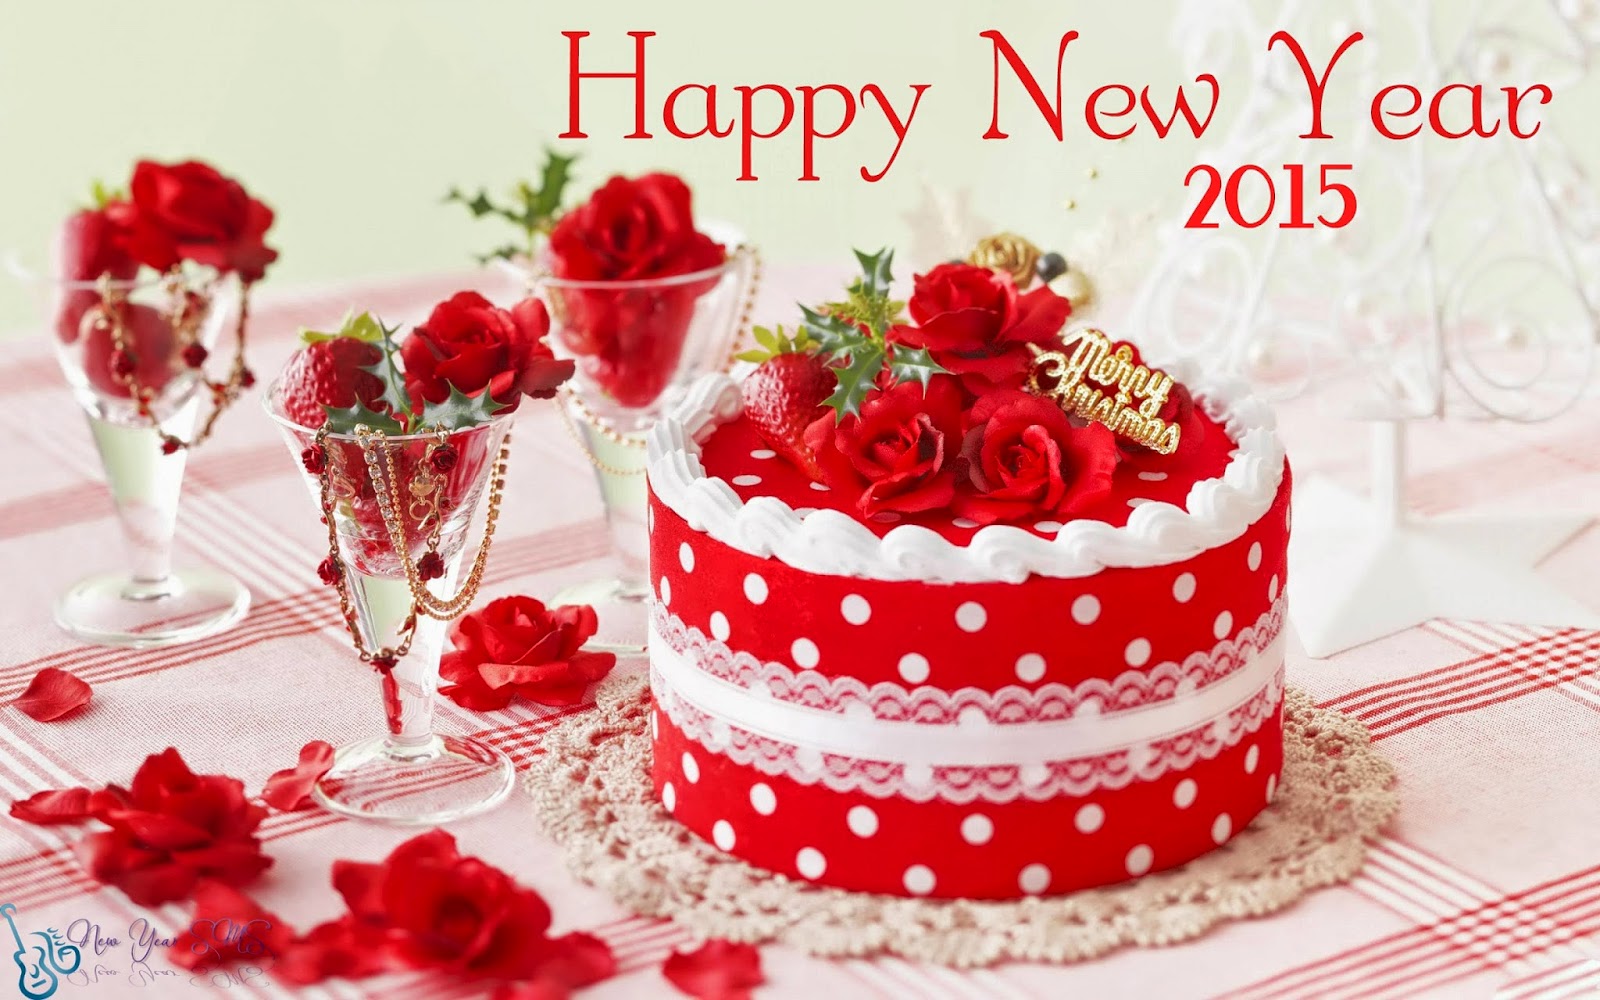 Free Download 2015 Happy New Year Images Free Download Hd Background Wallpapers [1600x1000] For